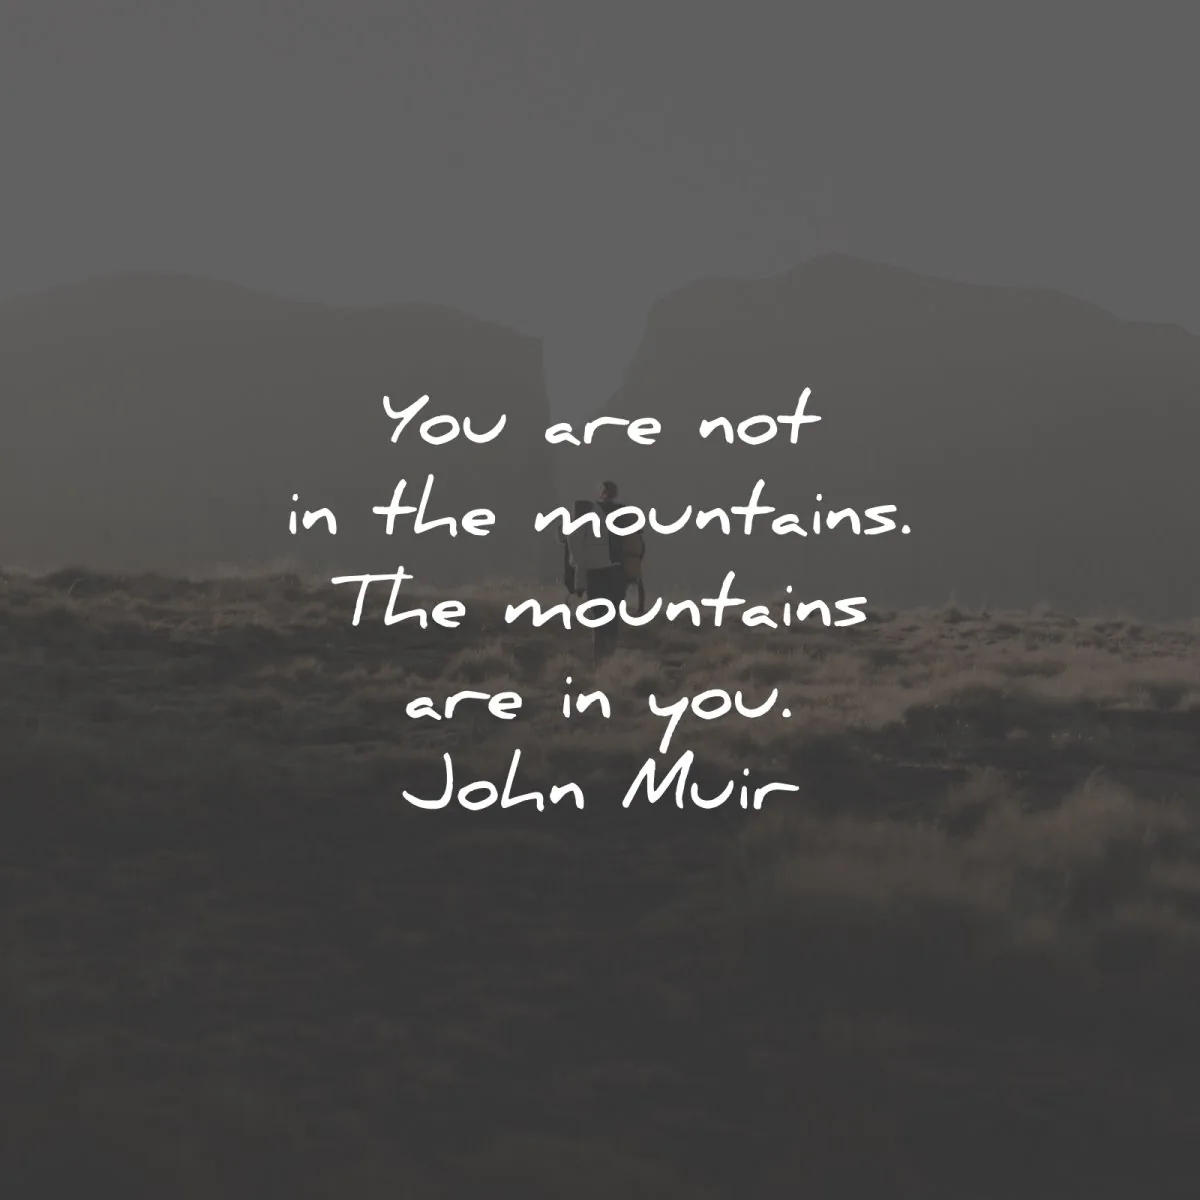 john muir quotes you are not the mountains you wisdom